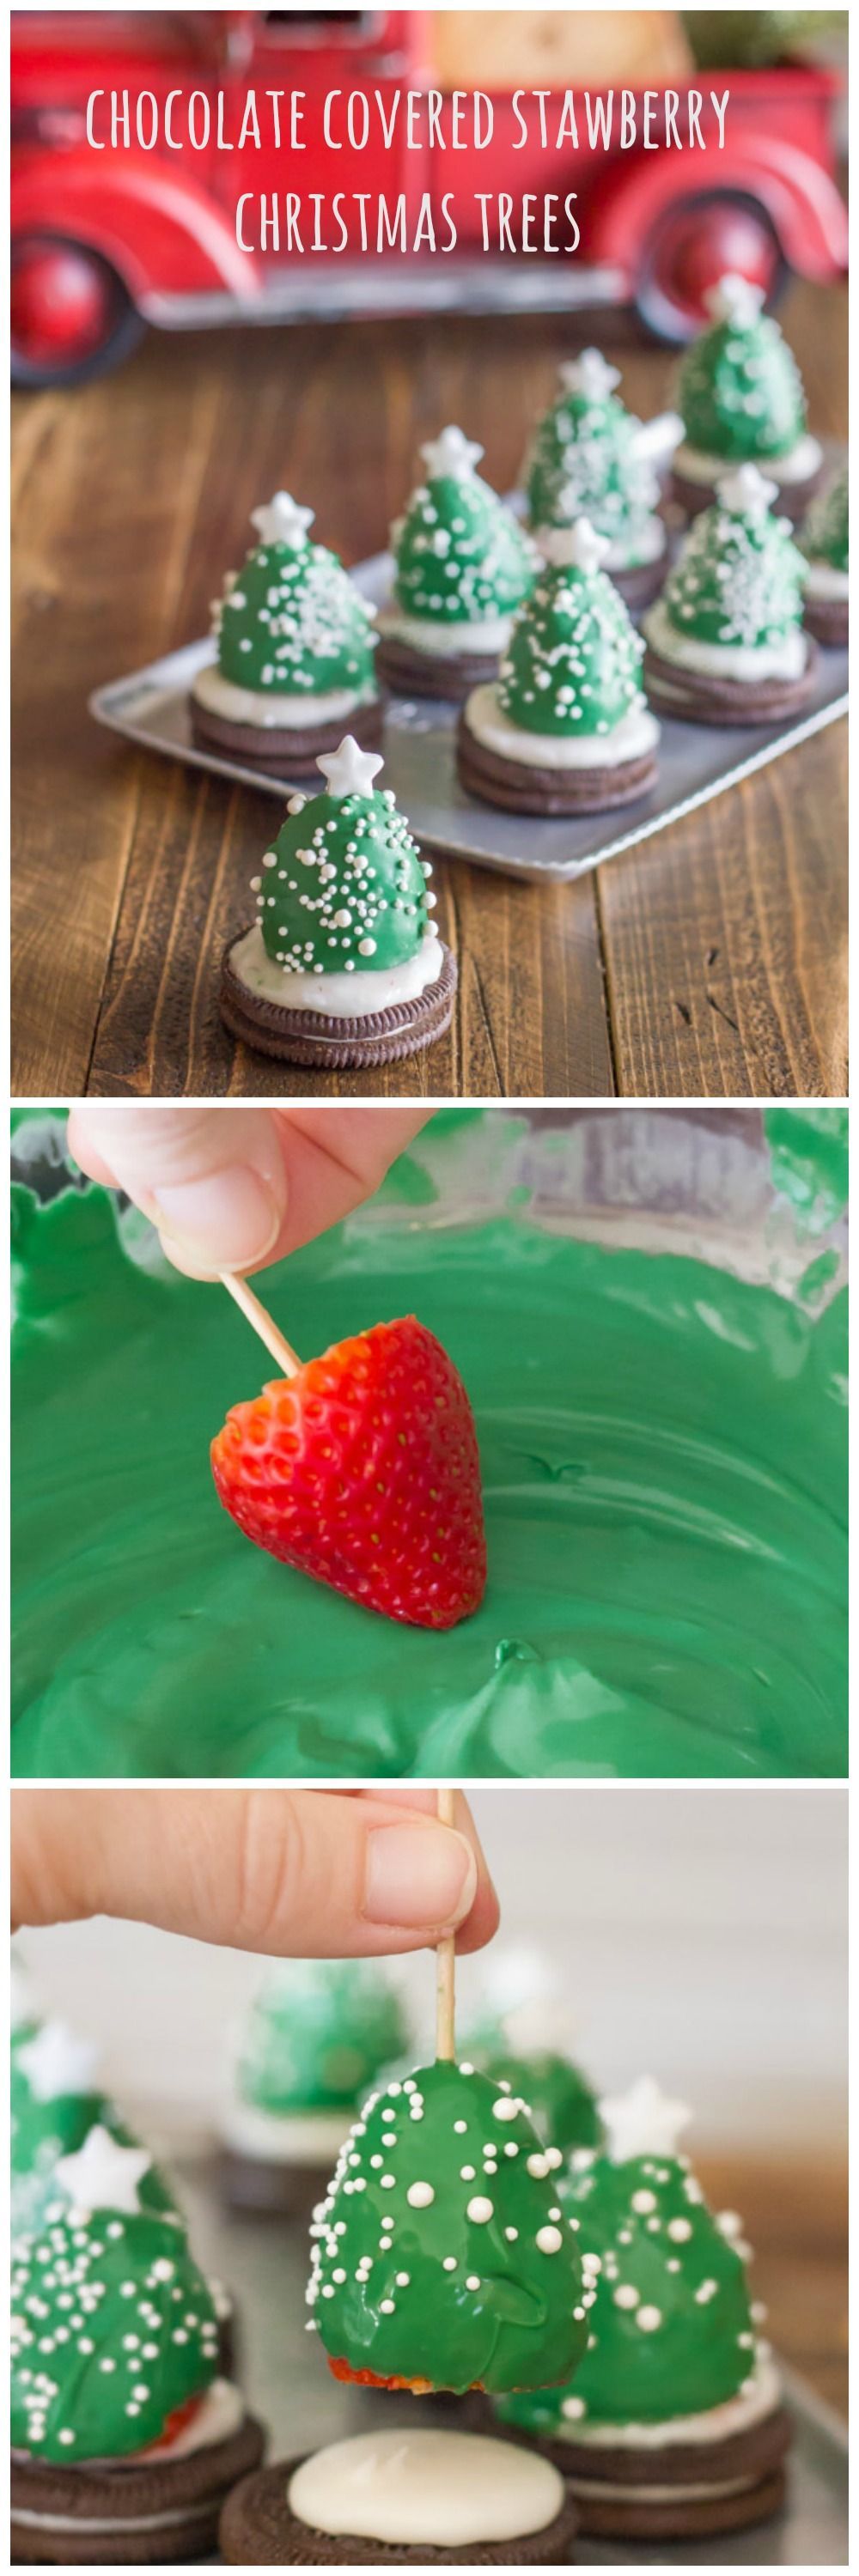 A fun kid-friendly project for Christmas! Christmas tree strawberries #ChristmasTr